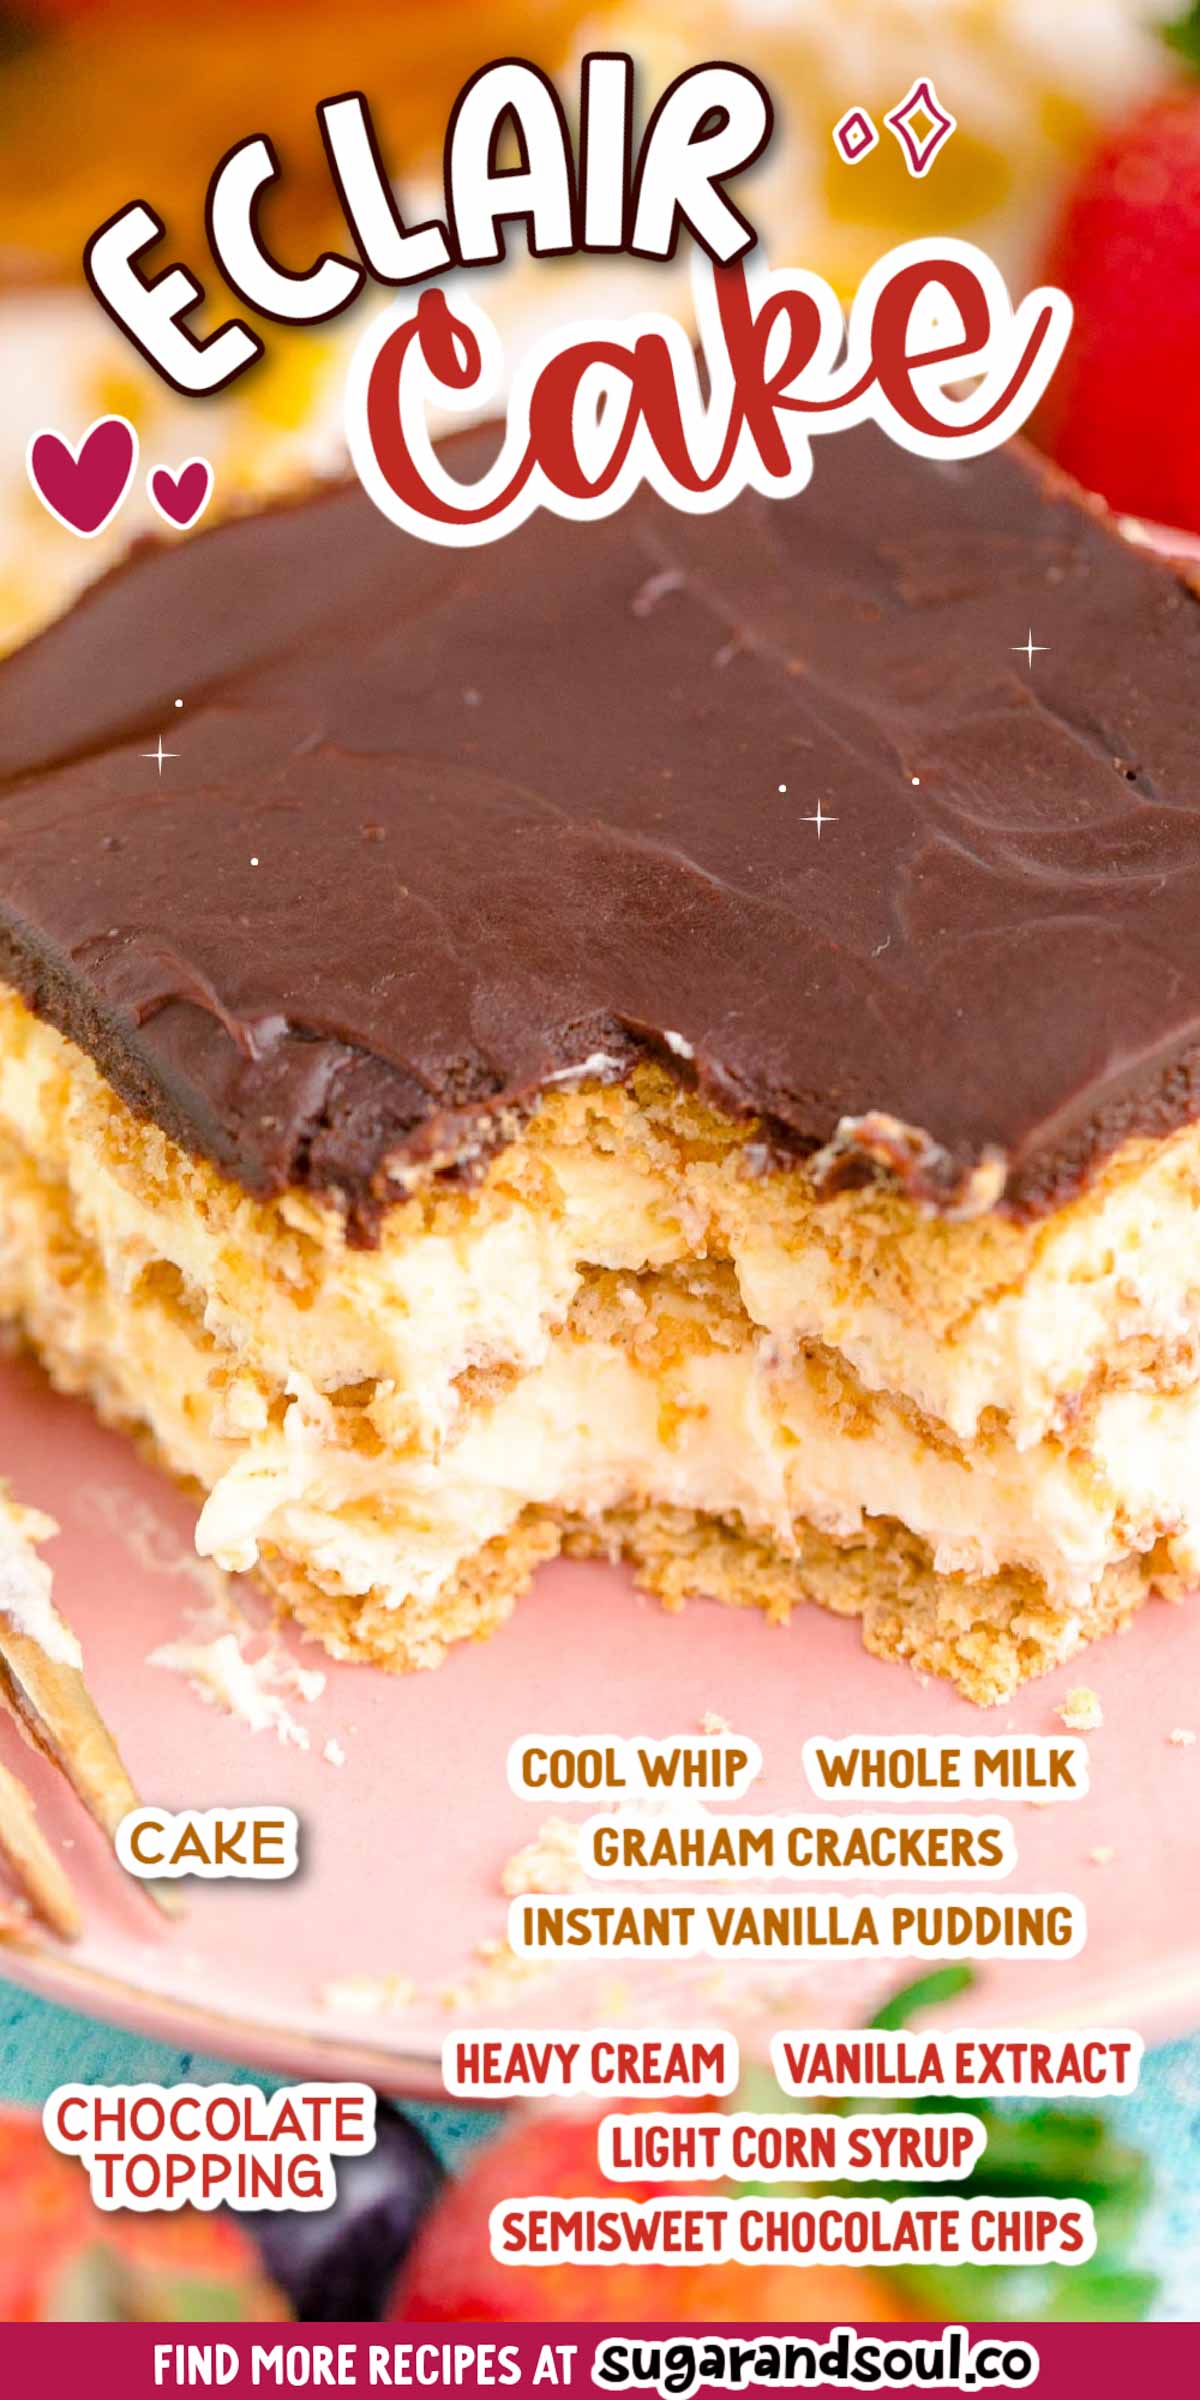 Chocolate Eclair Cake is a no-bake, icebox cake that's made with layers of graham crackers, vanilla cream, and homemade chocolate ganache! Prep this chilled dessert in just 20 minutes! via @sugarandsoulco